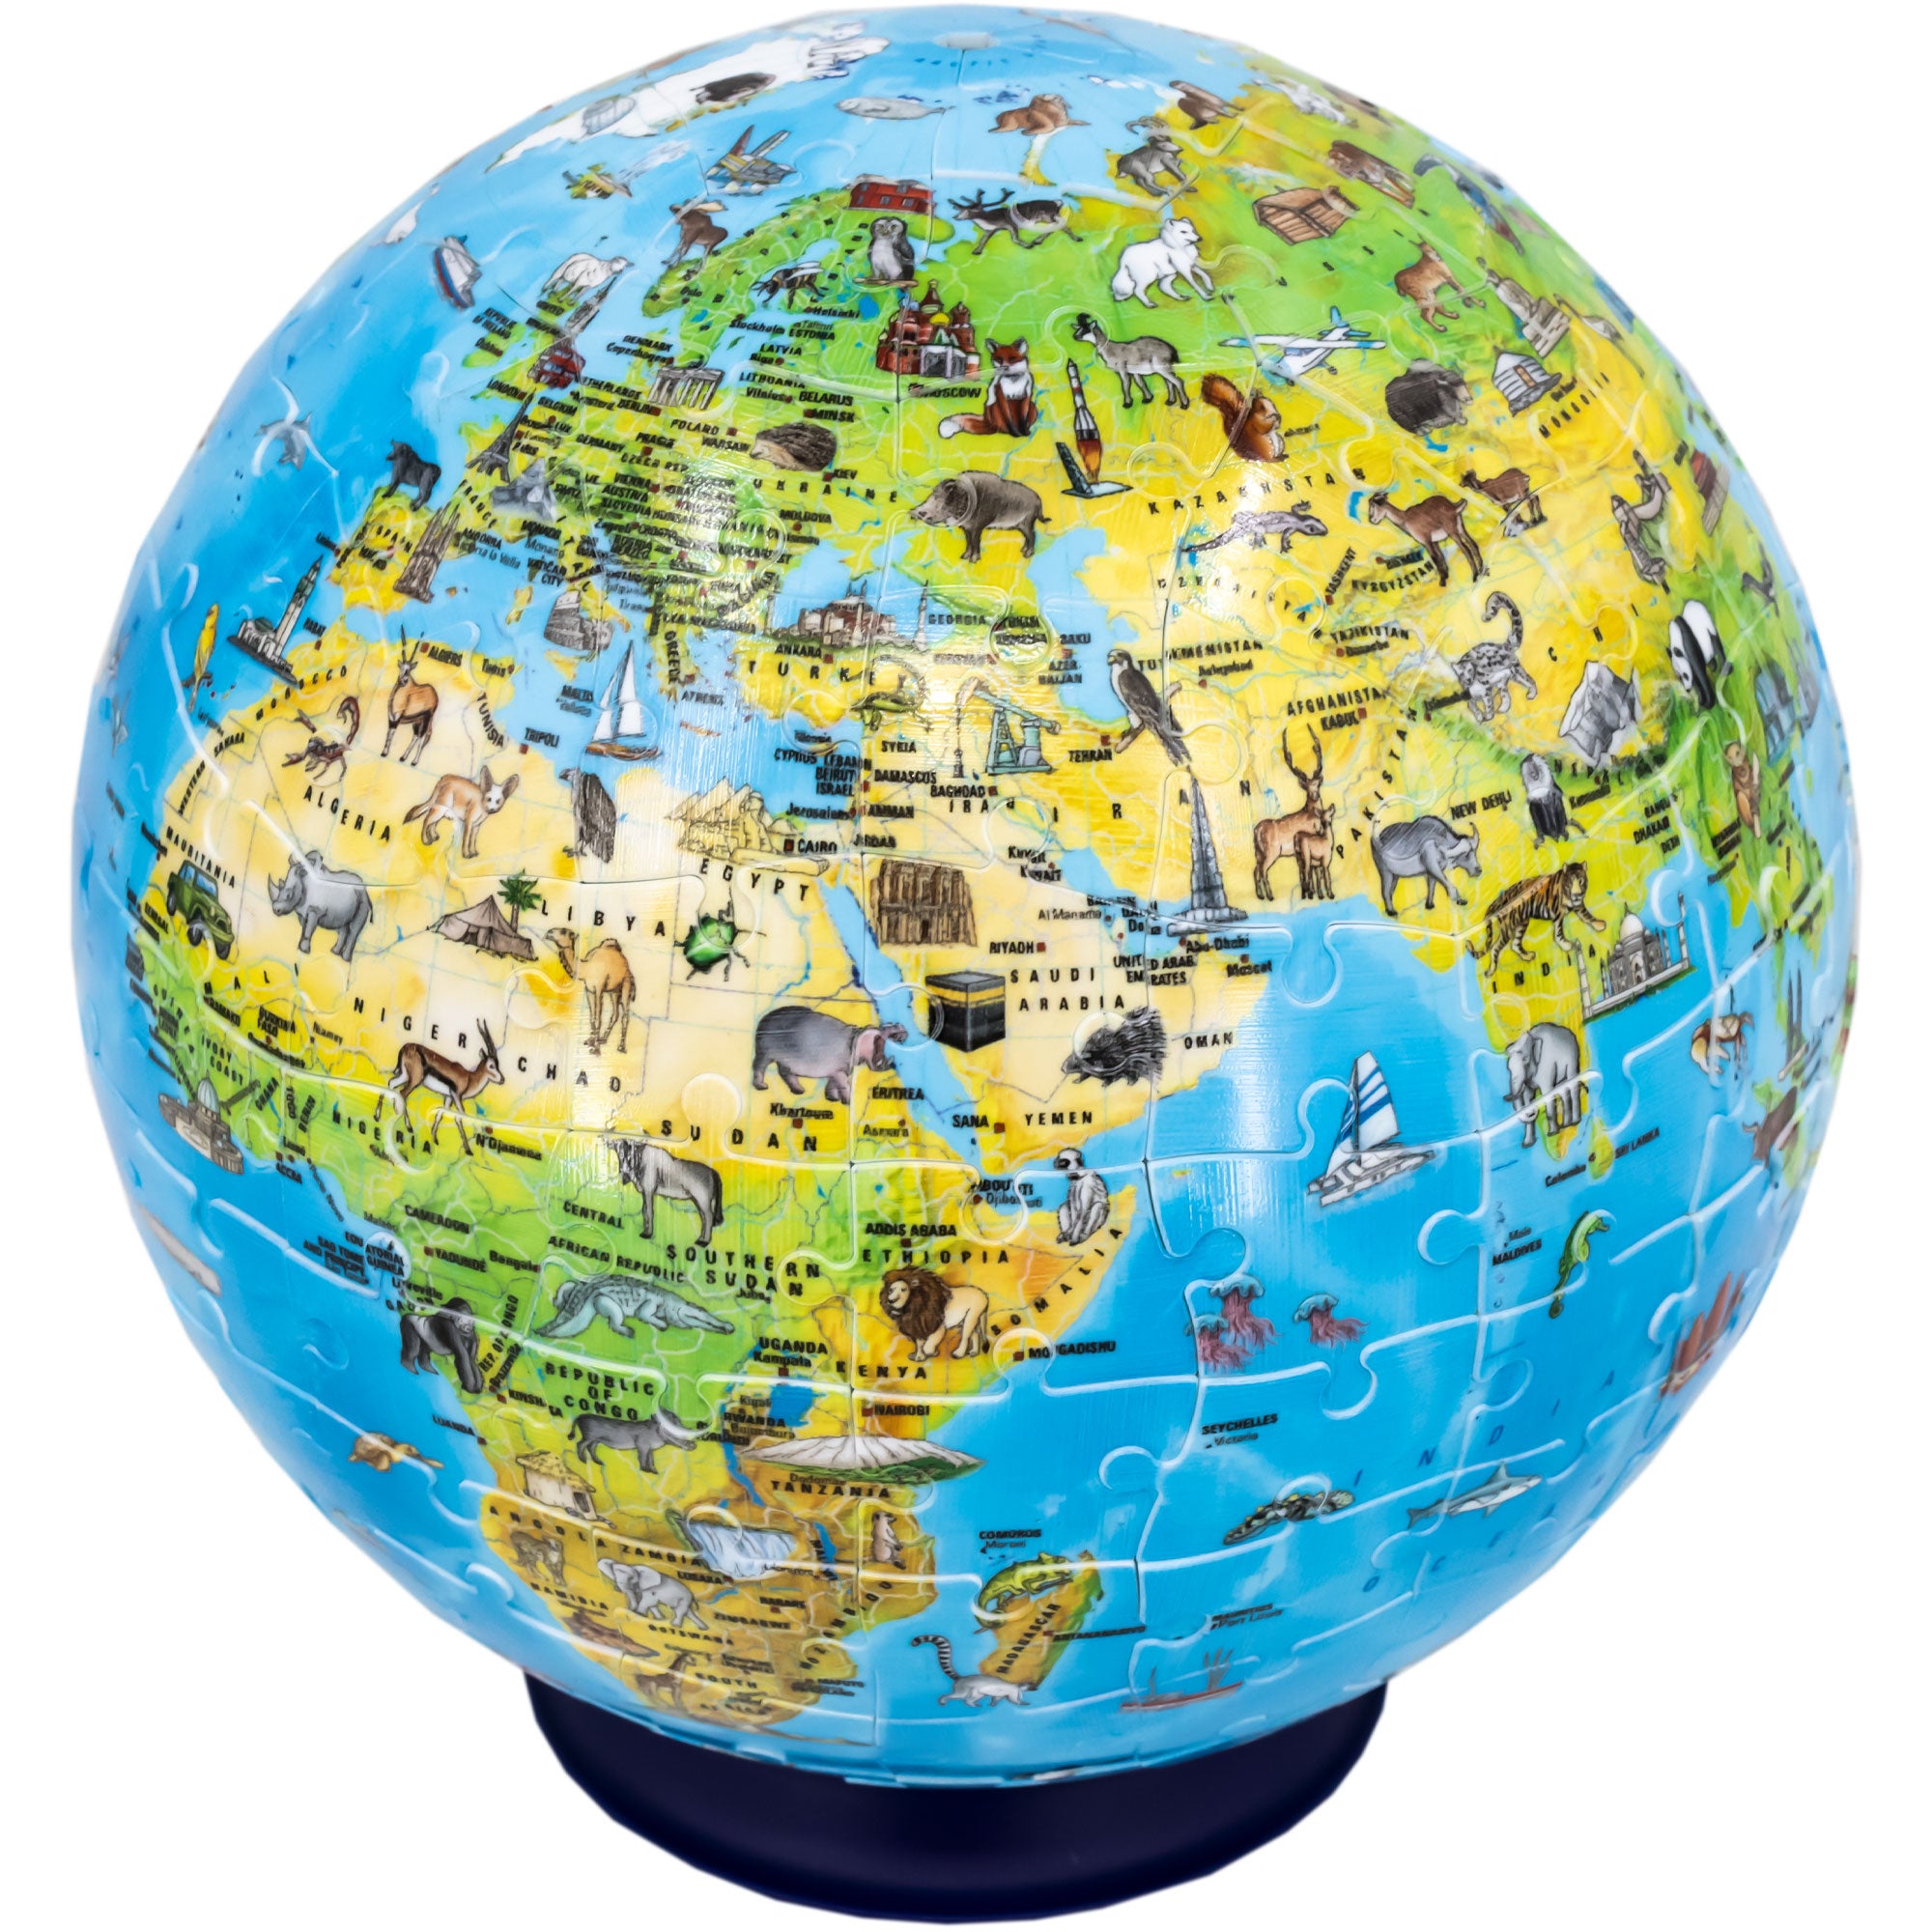 The Puzzleball Globe 180 piece set, put together and placed on a stand. The 3 D globe portion showing is of Africa, Europe, and west Asia. There are many illustrations of animals and famous building structures on the globe.